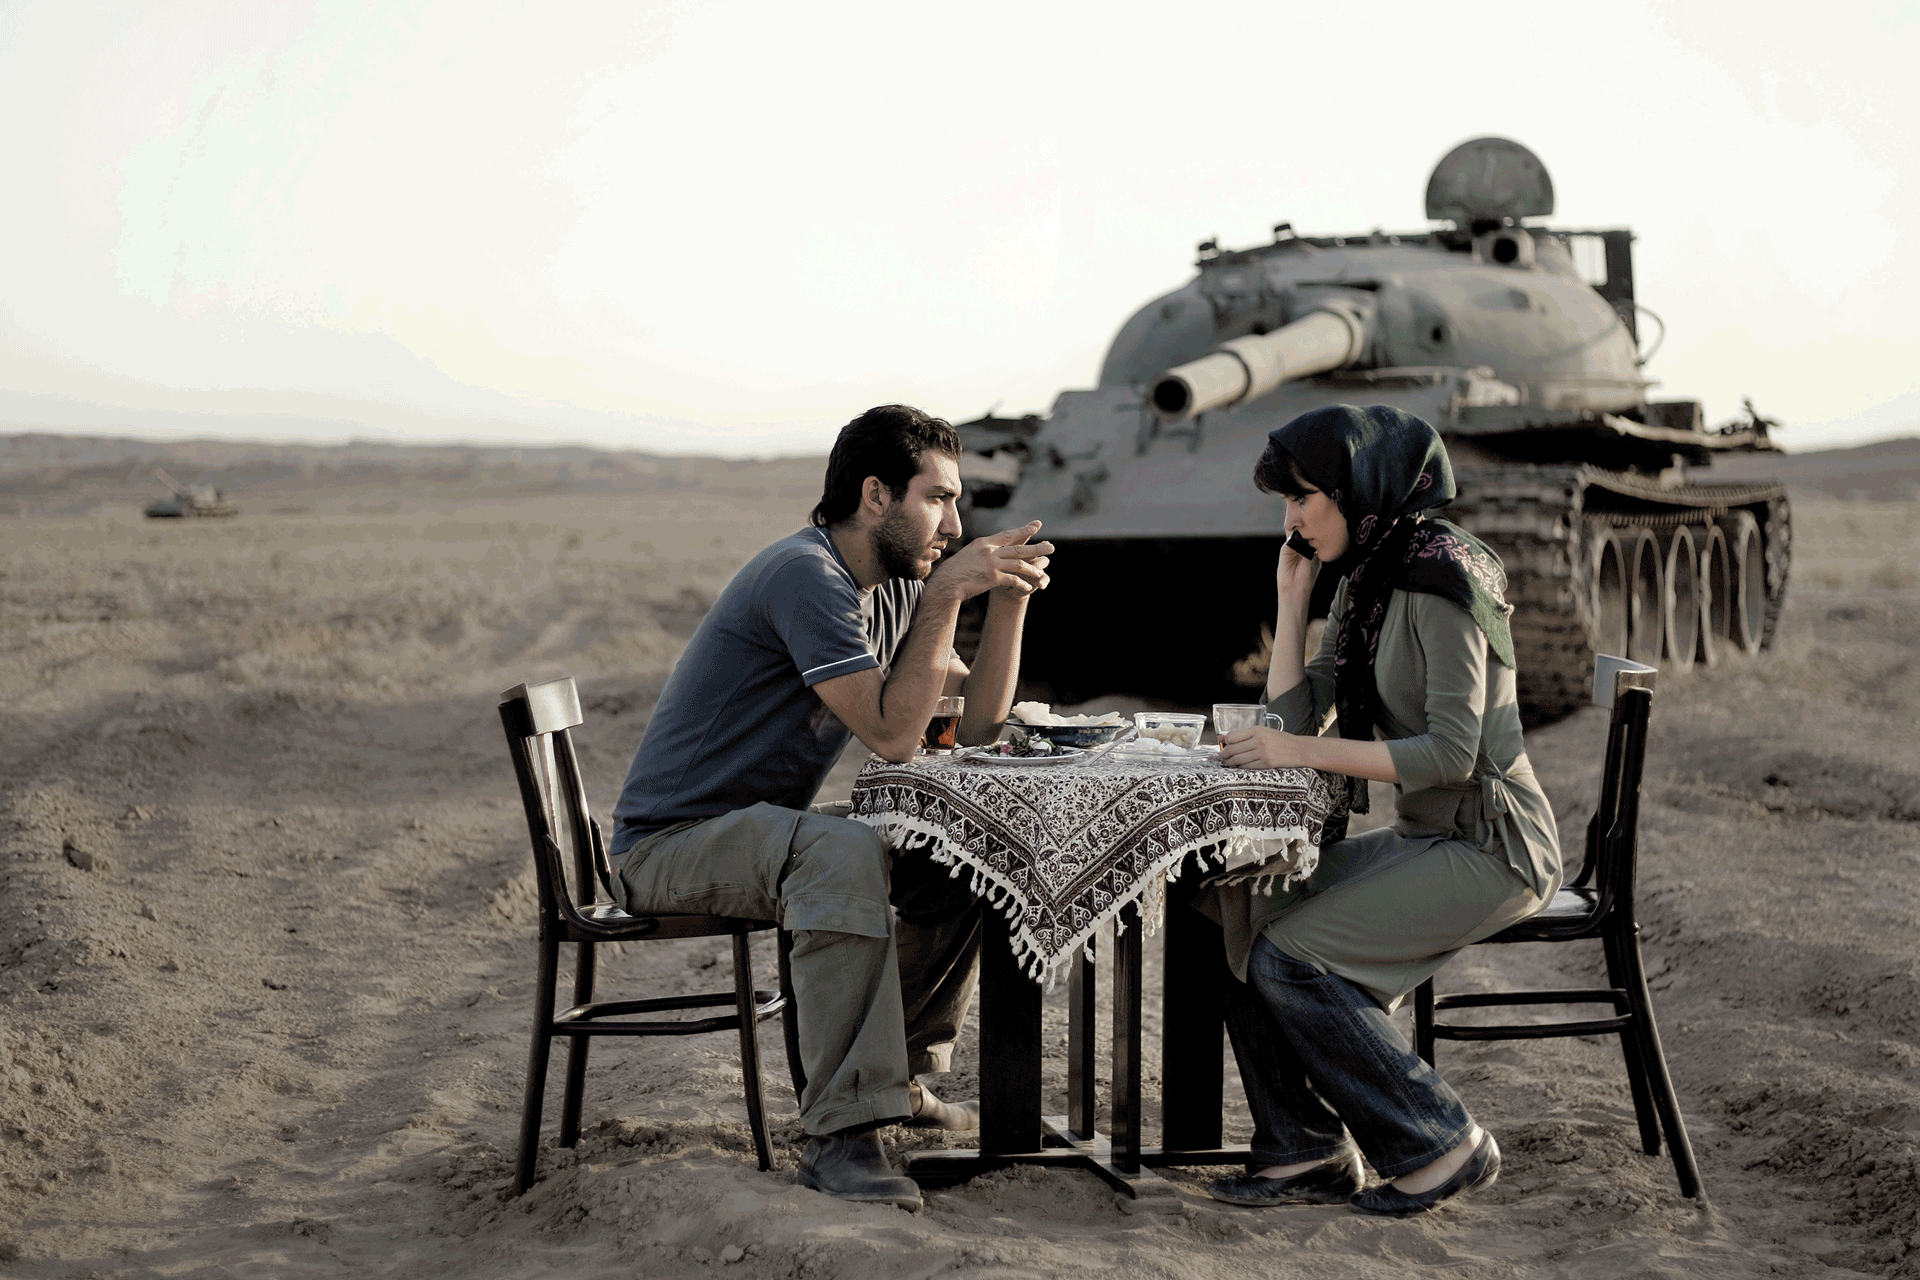 Man and woman sit at a table with a tank behind them.